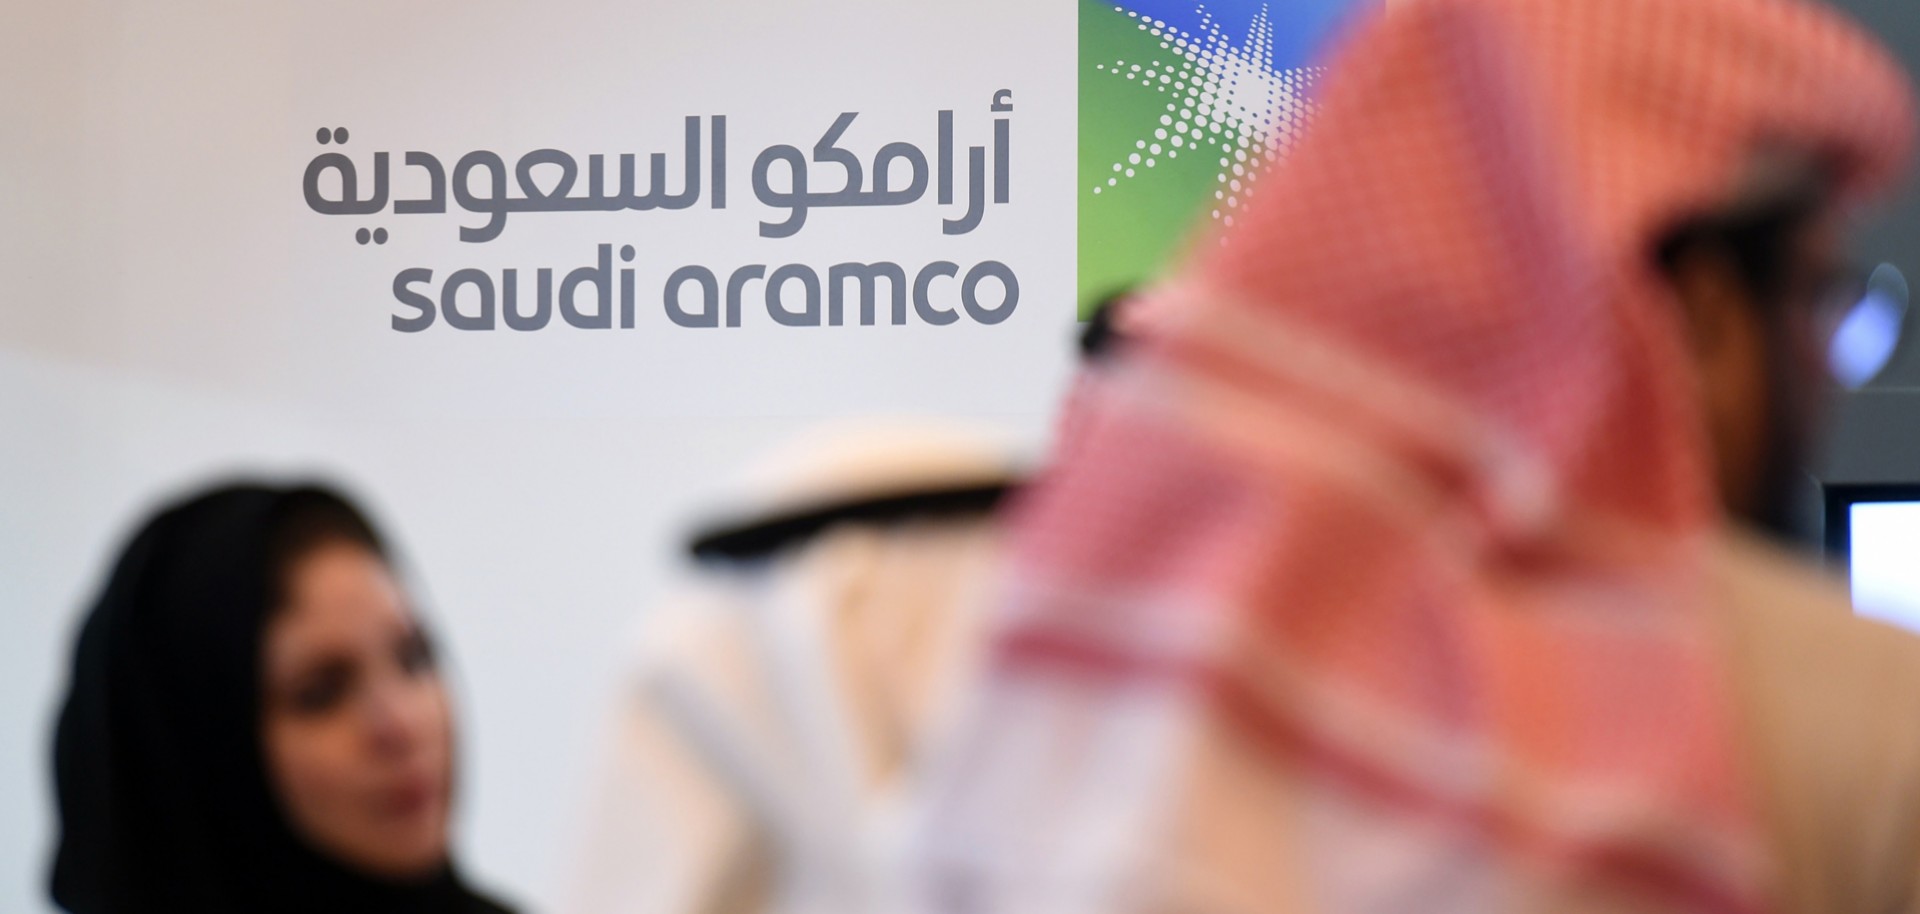 Reforming corporate income taxes for energy companies is a critical move for the Saudi Kingdom as it prepares an initial public offering for up to five percent of state-owned Saudi Aramco, a crucial step in its bid to diversify the economy.